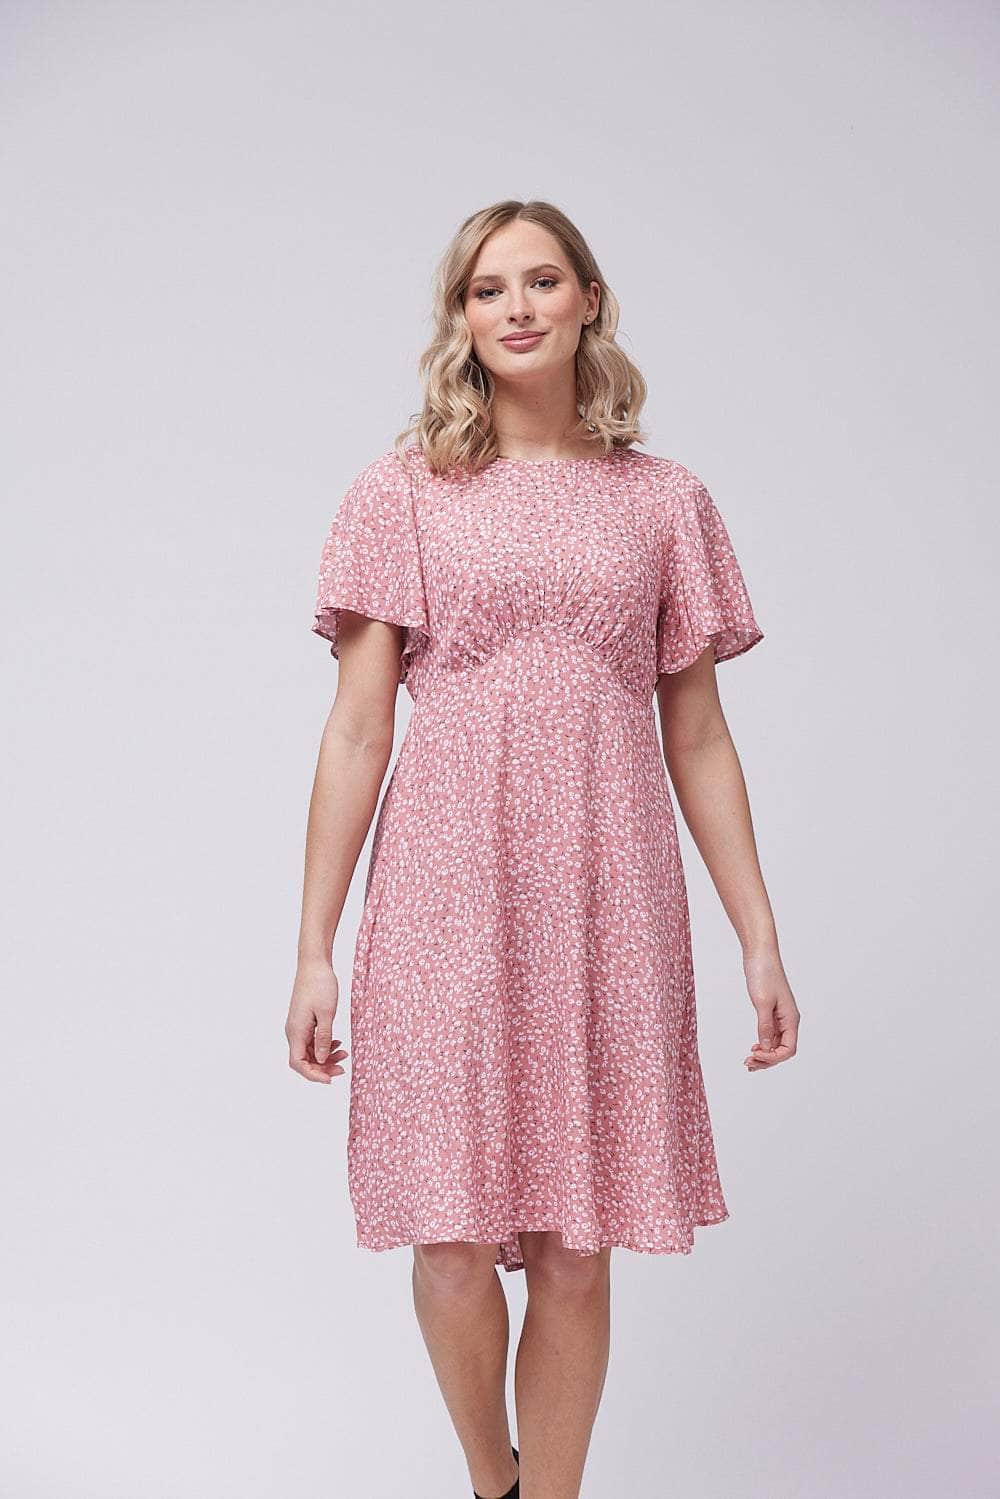 FP-F Dress Pink / UK: 10 - EU: 36 - US: XS Saloos Floral Printed Dress with Fluted Cape Sleeves